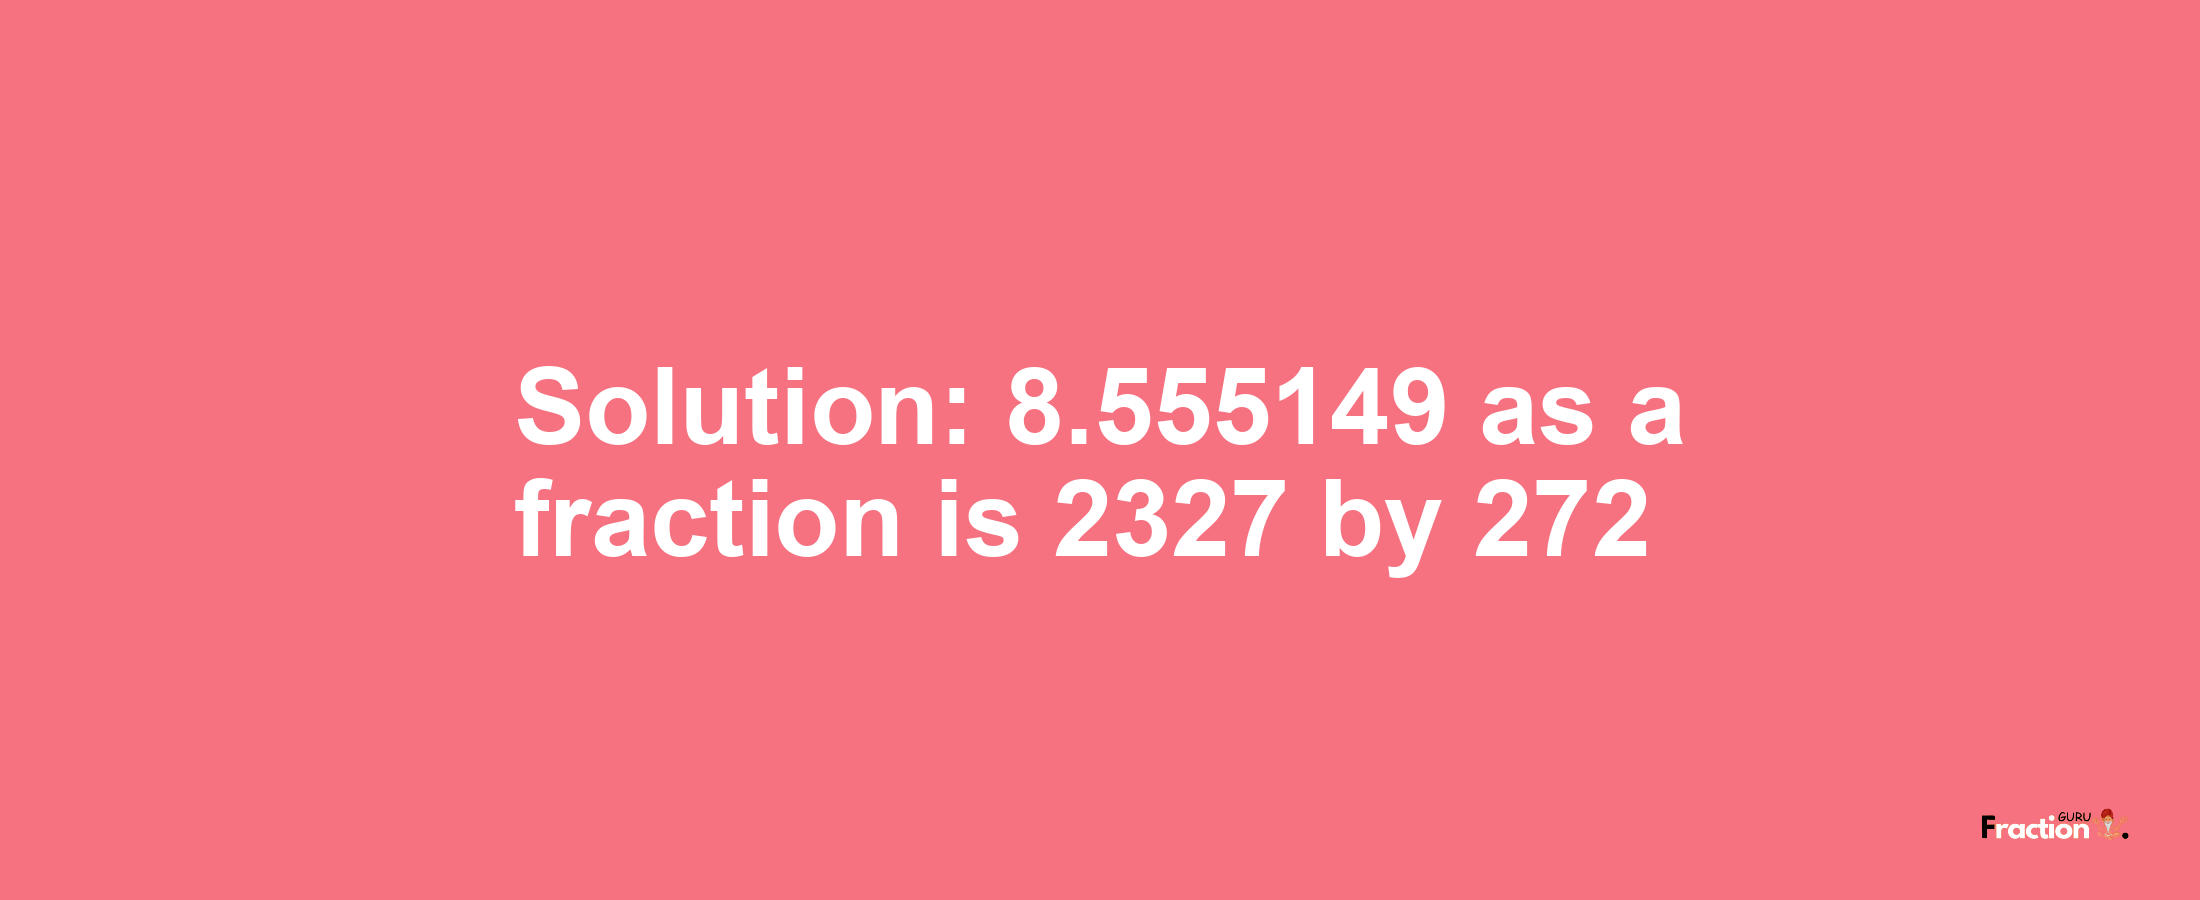 Solution:8.555149 as a fraction is 2327/272